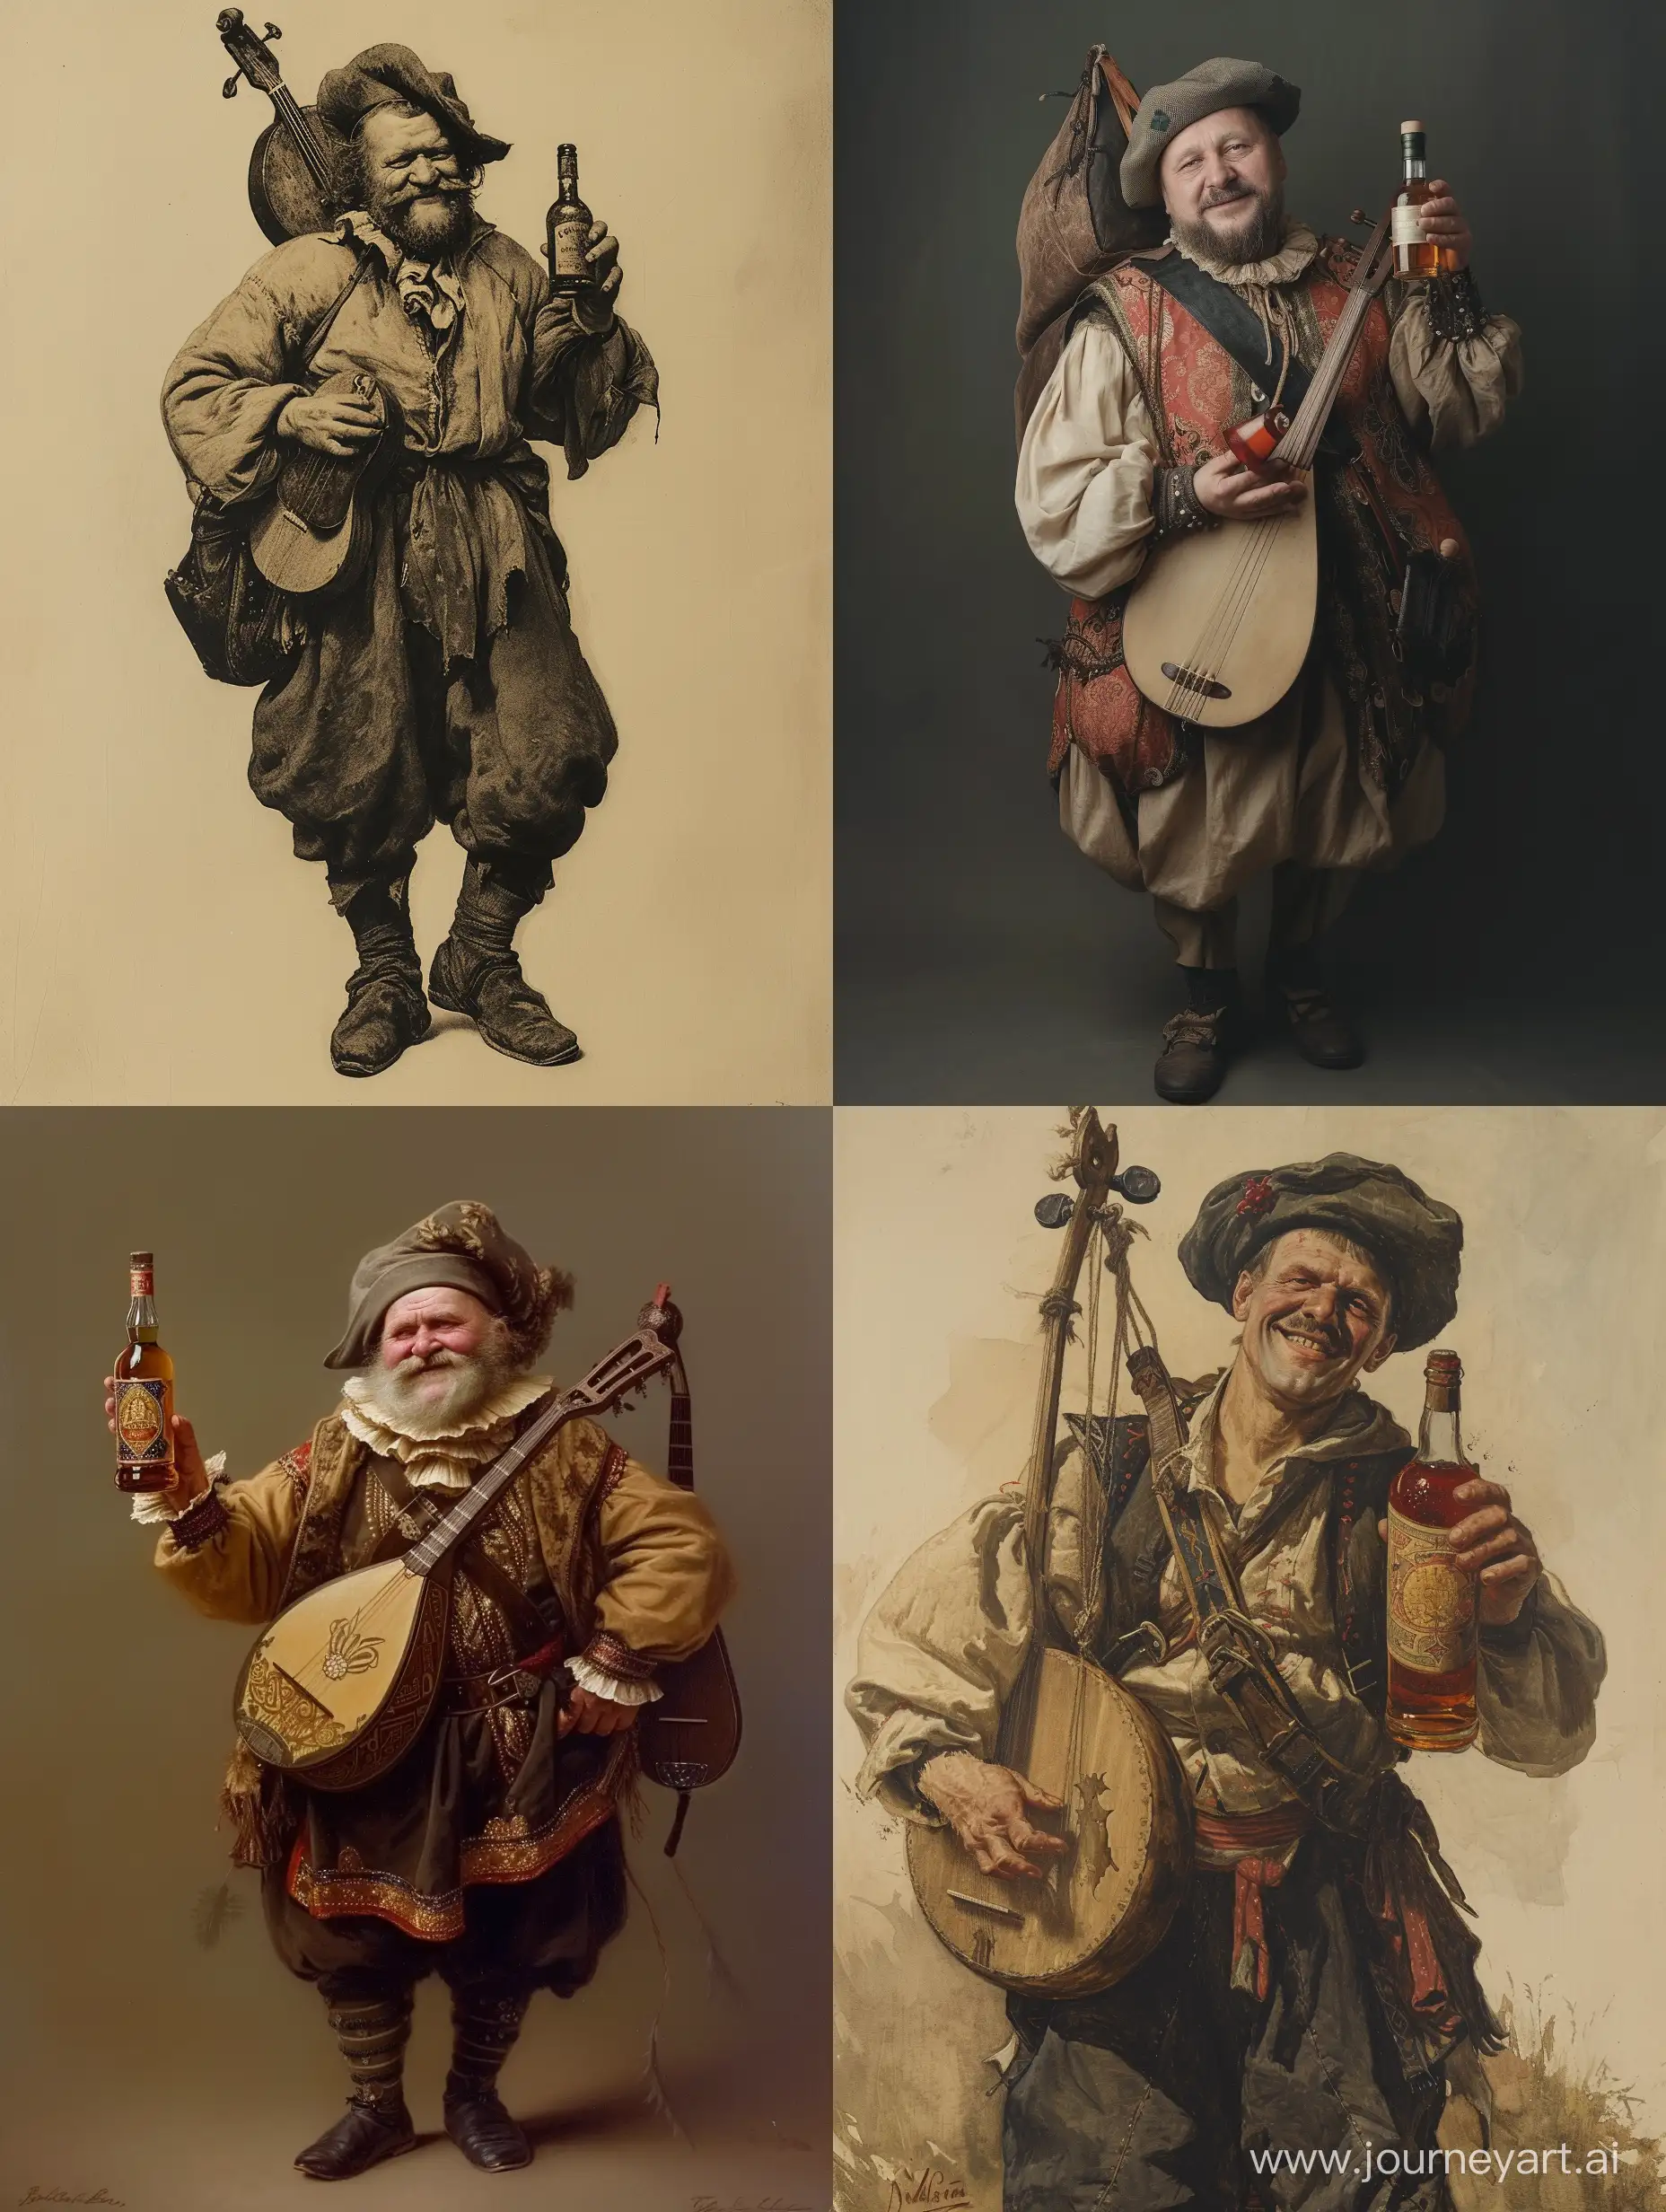 Slavic-Jester-Holding-Rum-Bottle-with-Lute-and-Cap